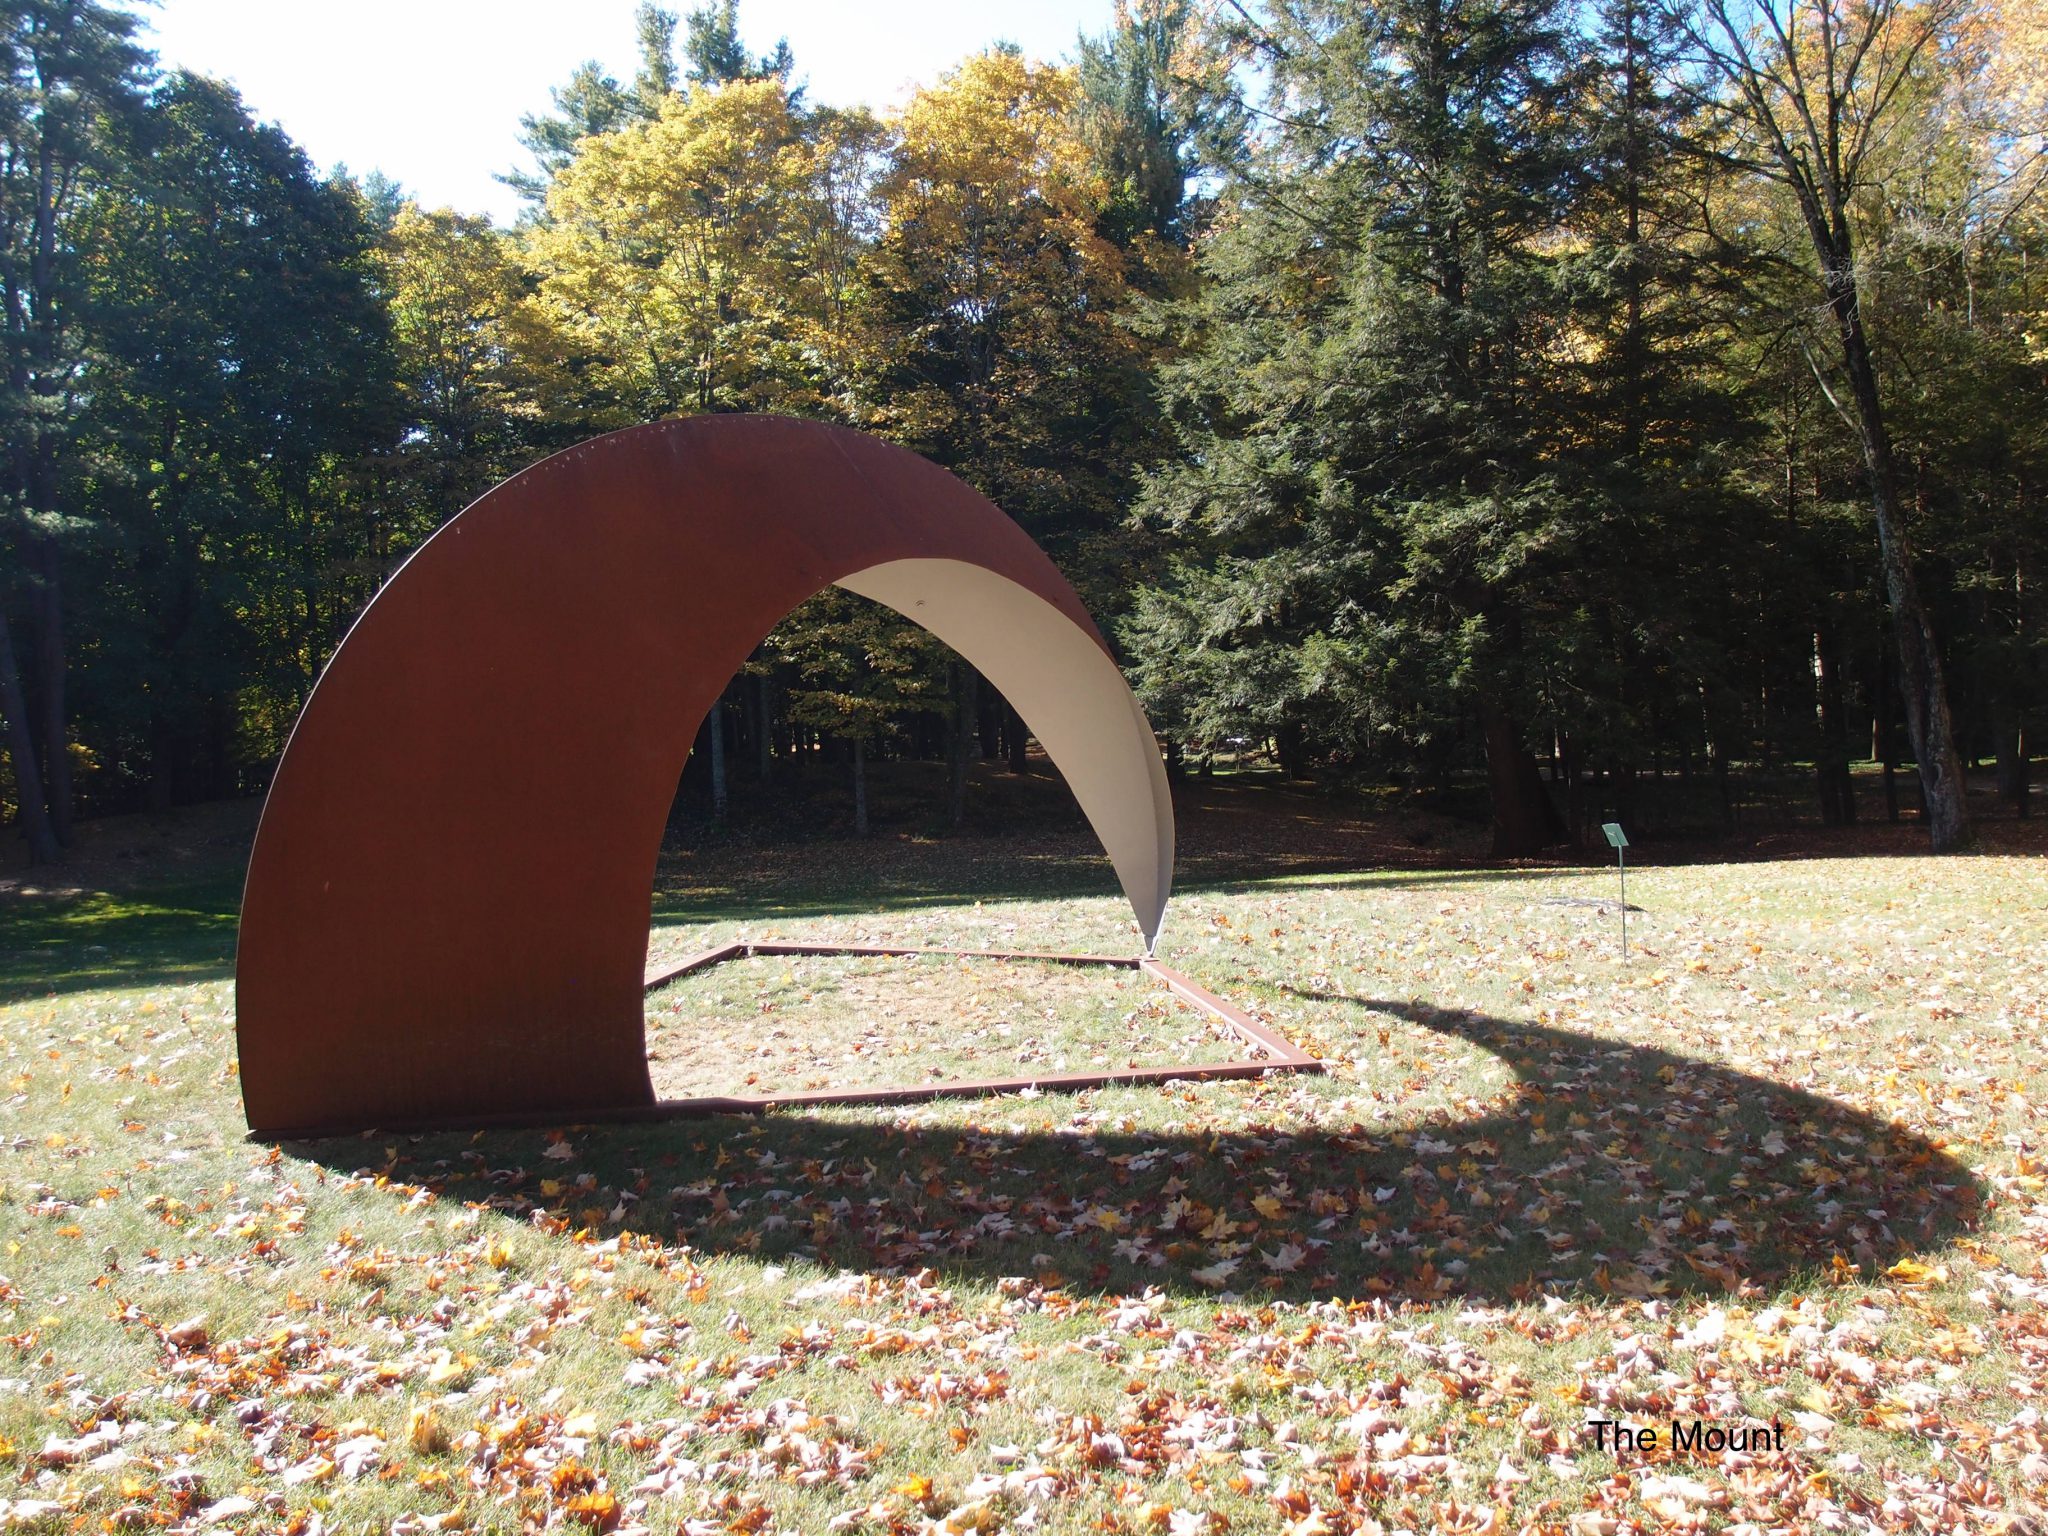 ARCH II, by Ann Jon...with a seat inside. Another masterful exercise of sculptural shadow-play, which can be yours for only $36,000.00 (I confess that I WANT this lovely creation, but...... ) .